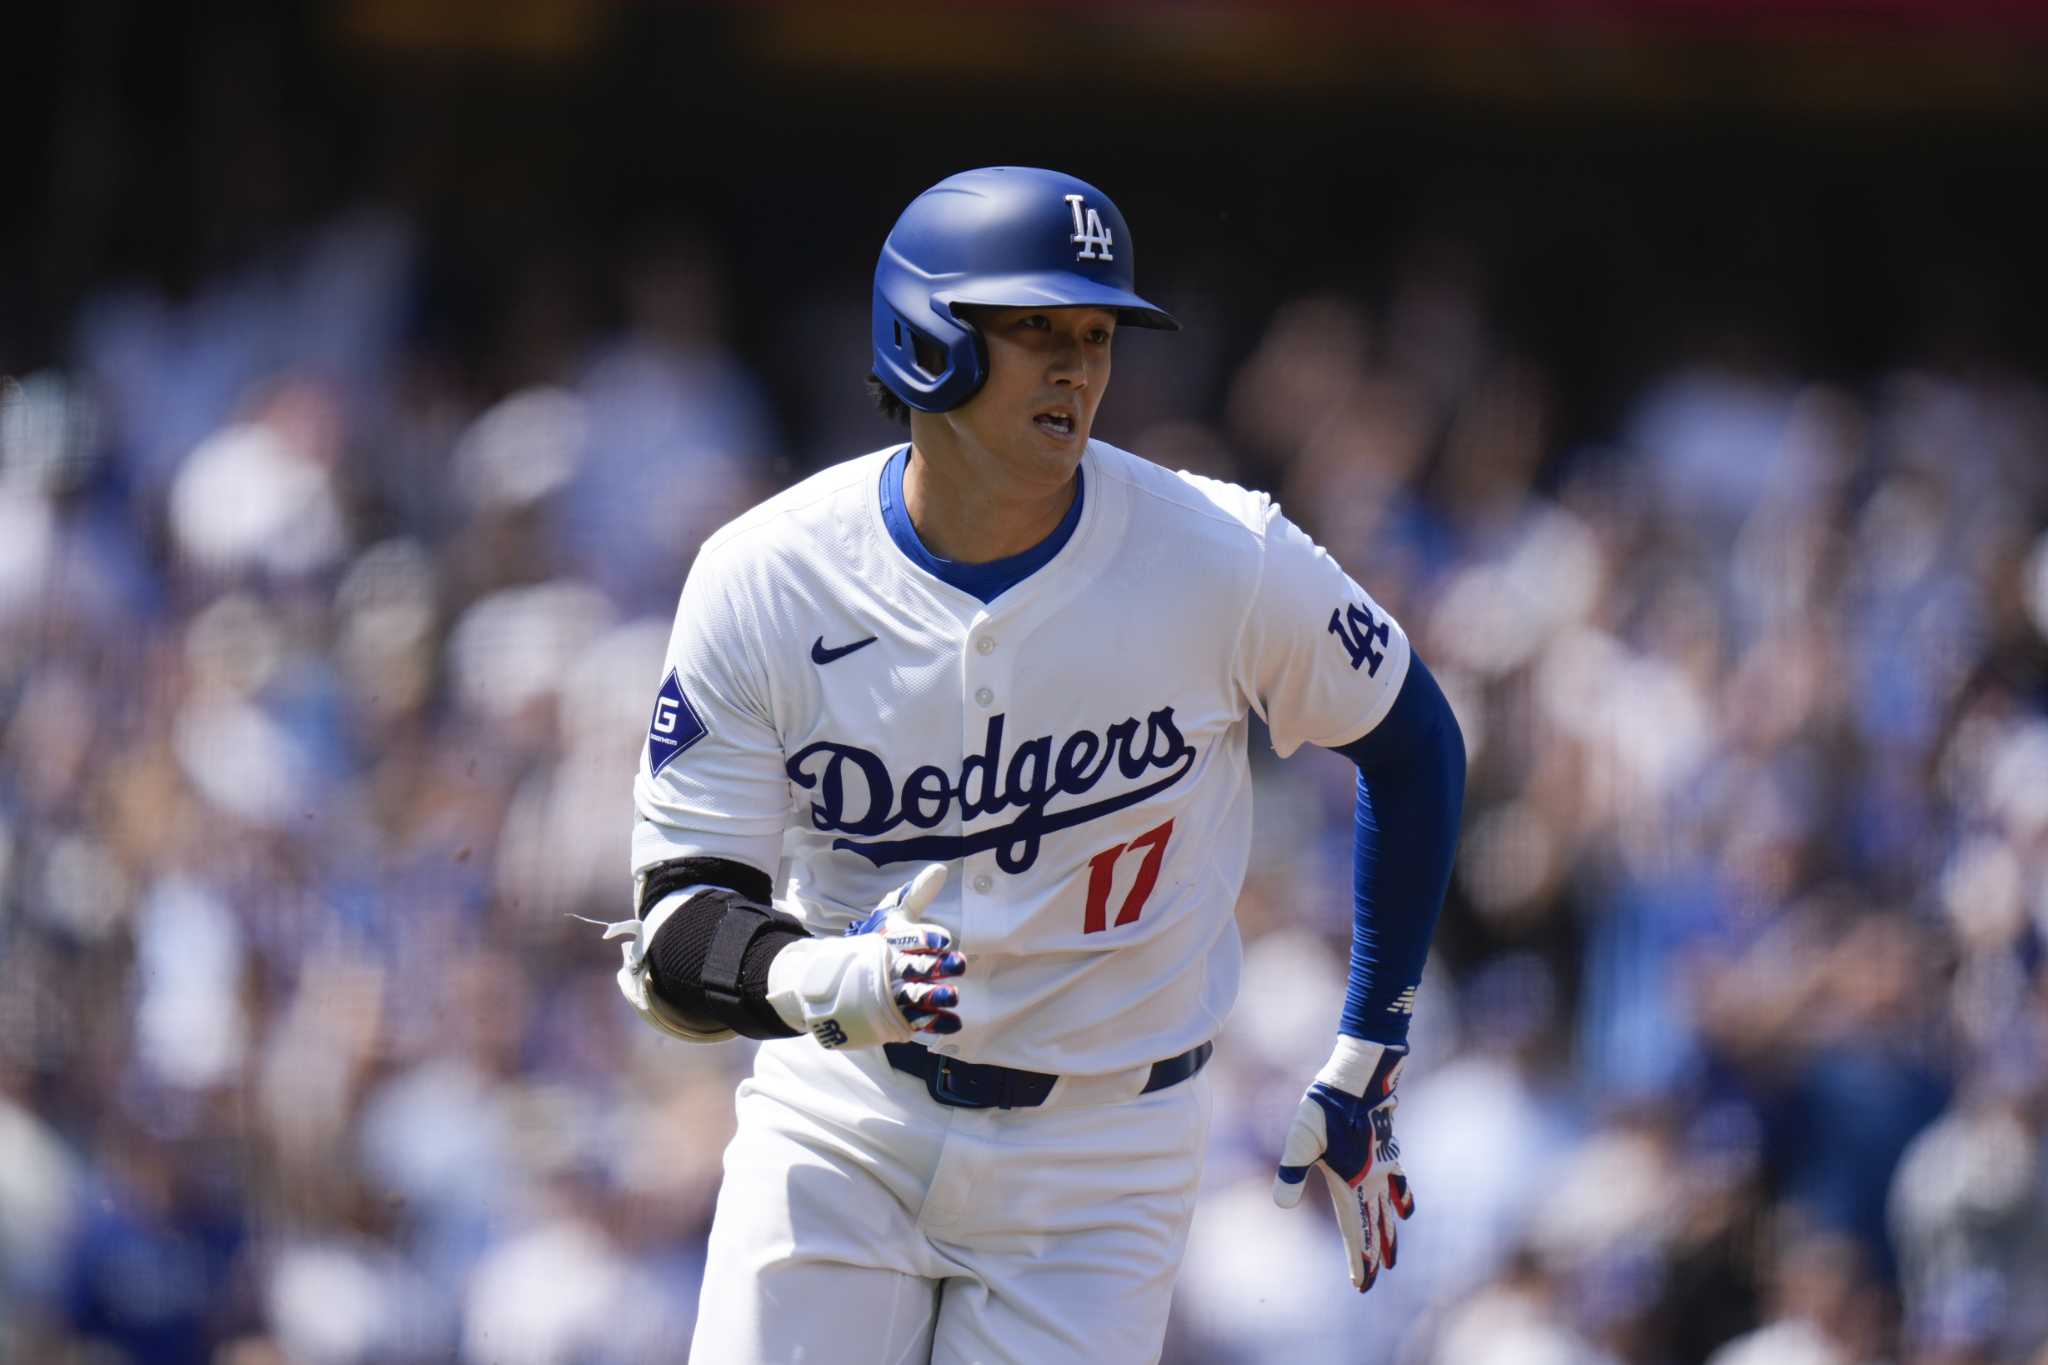 Shohei Ohtani reaches 3 times in home debut as the Dodgers rout the Cardinals 7-1